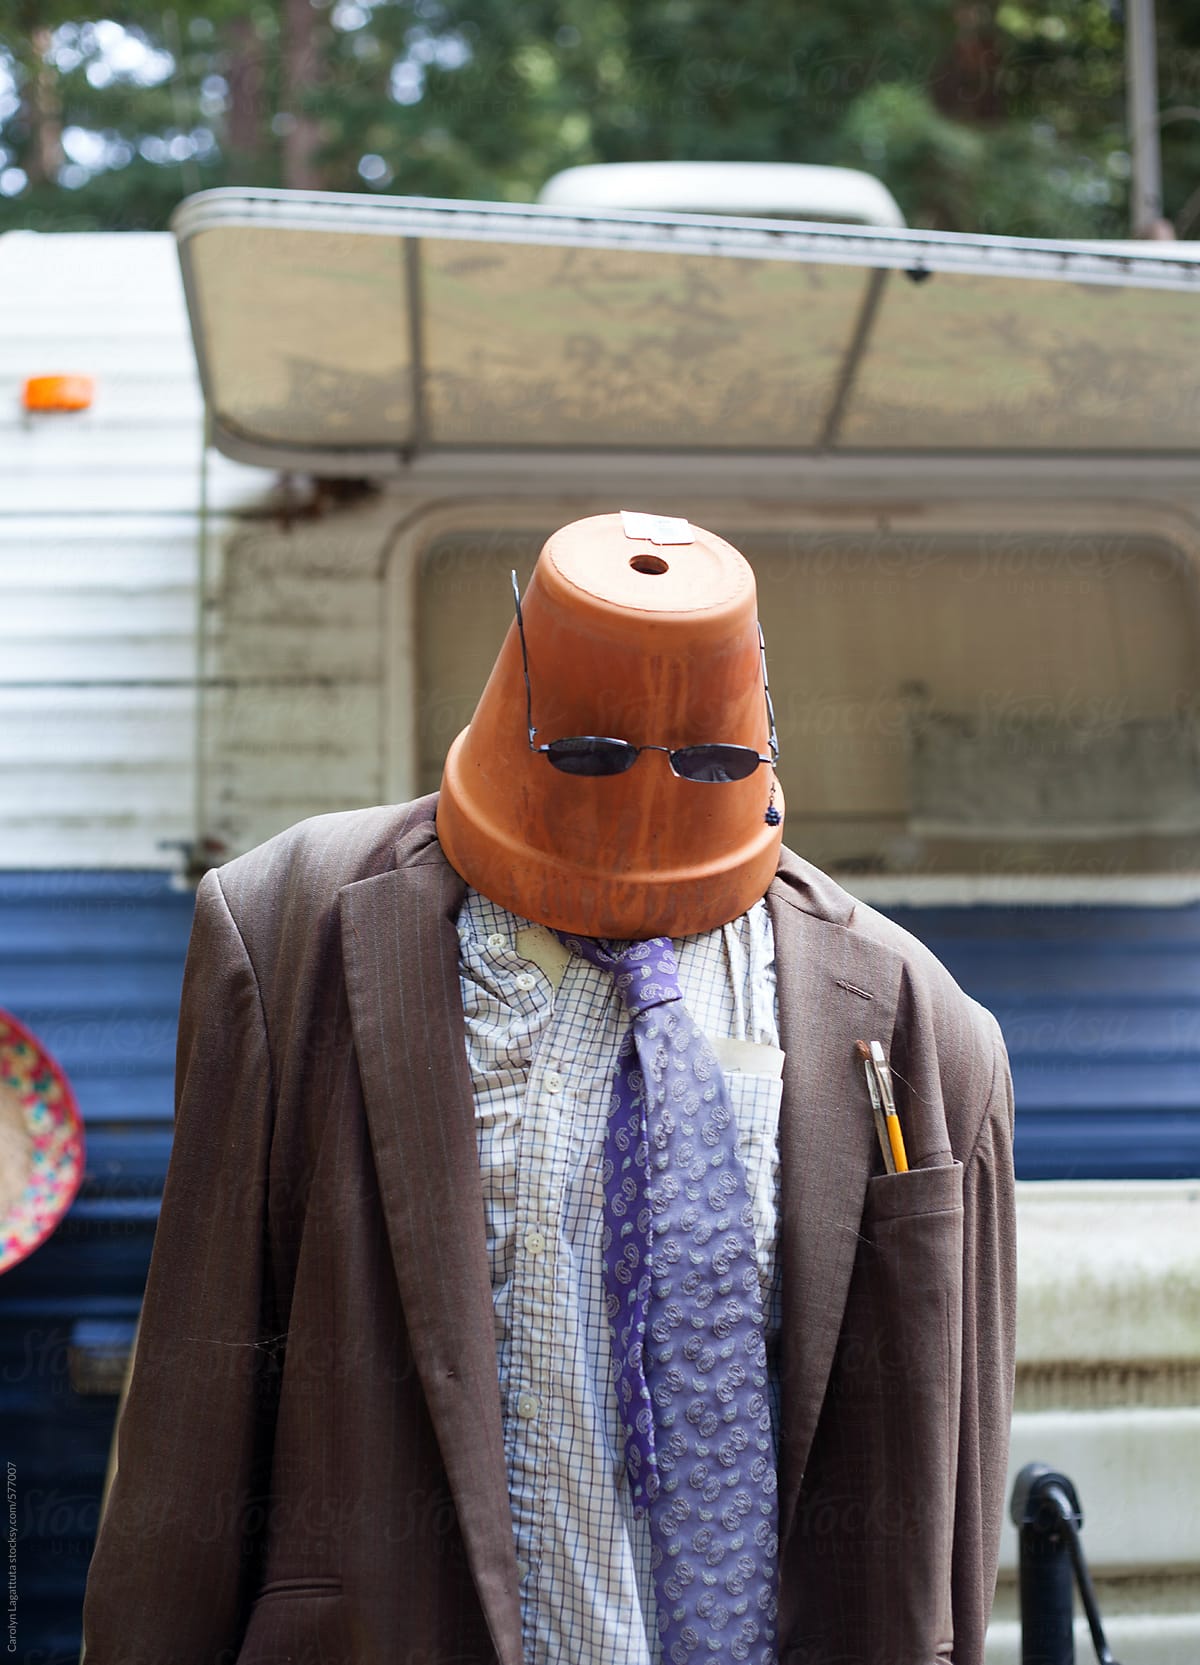 Man (or mannequin) in a trailer park with a pot on his head